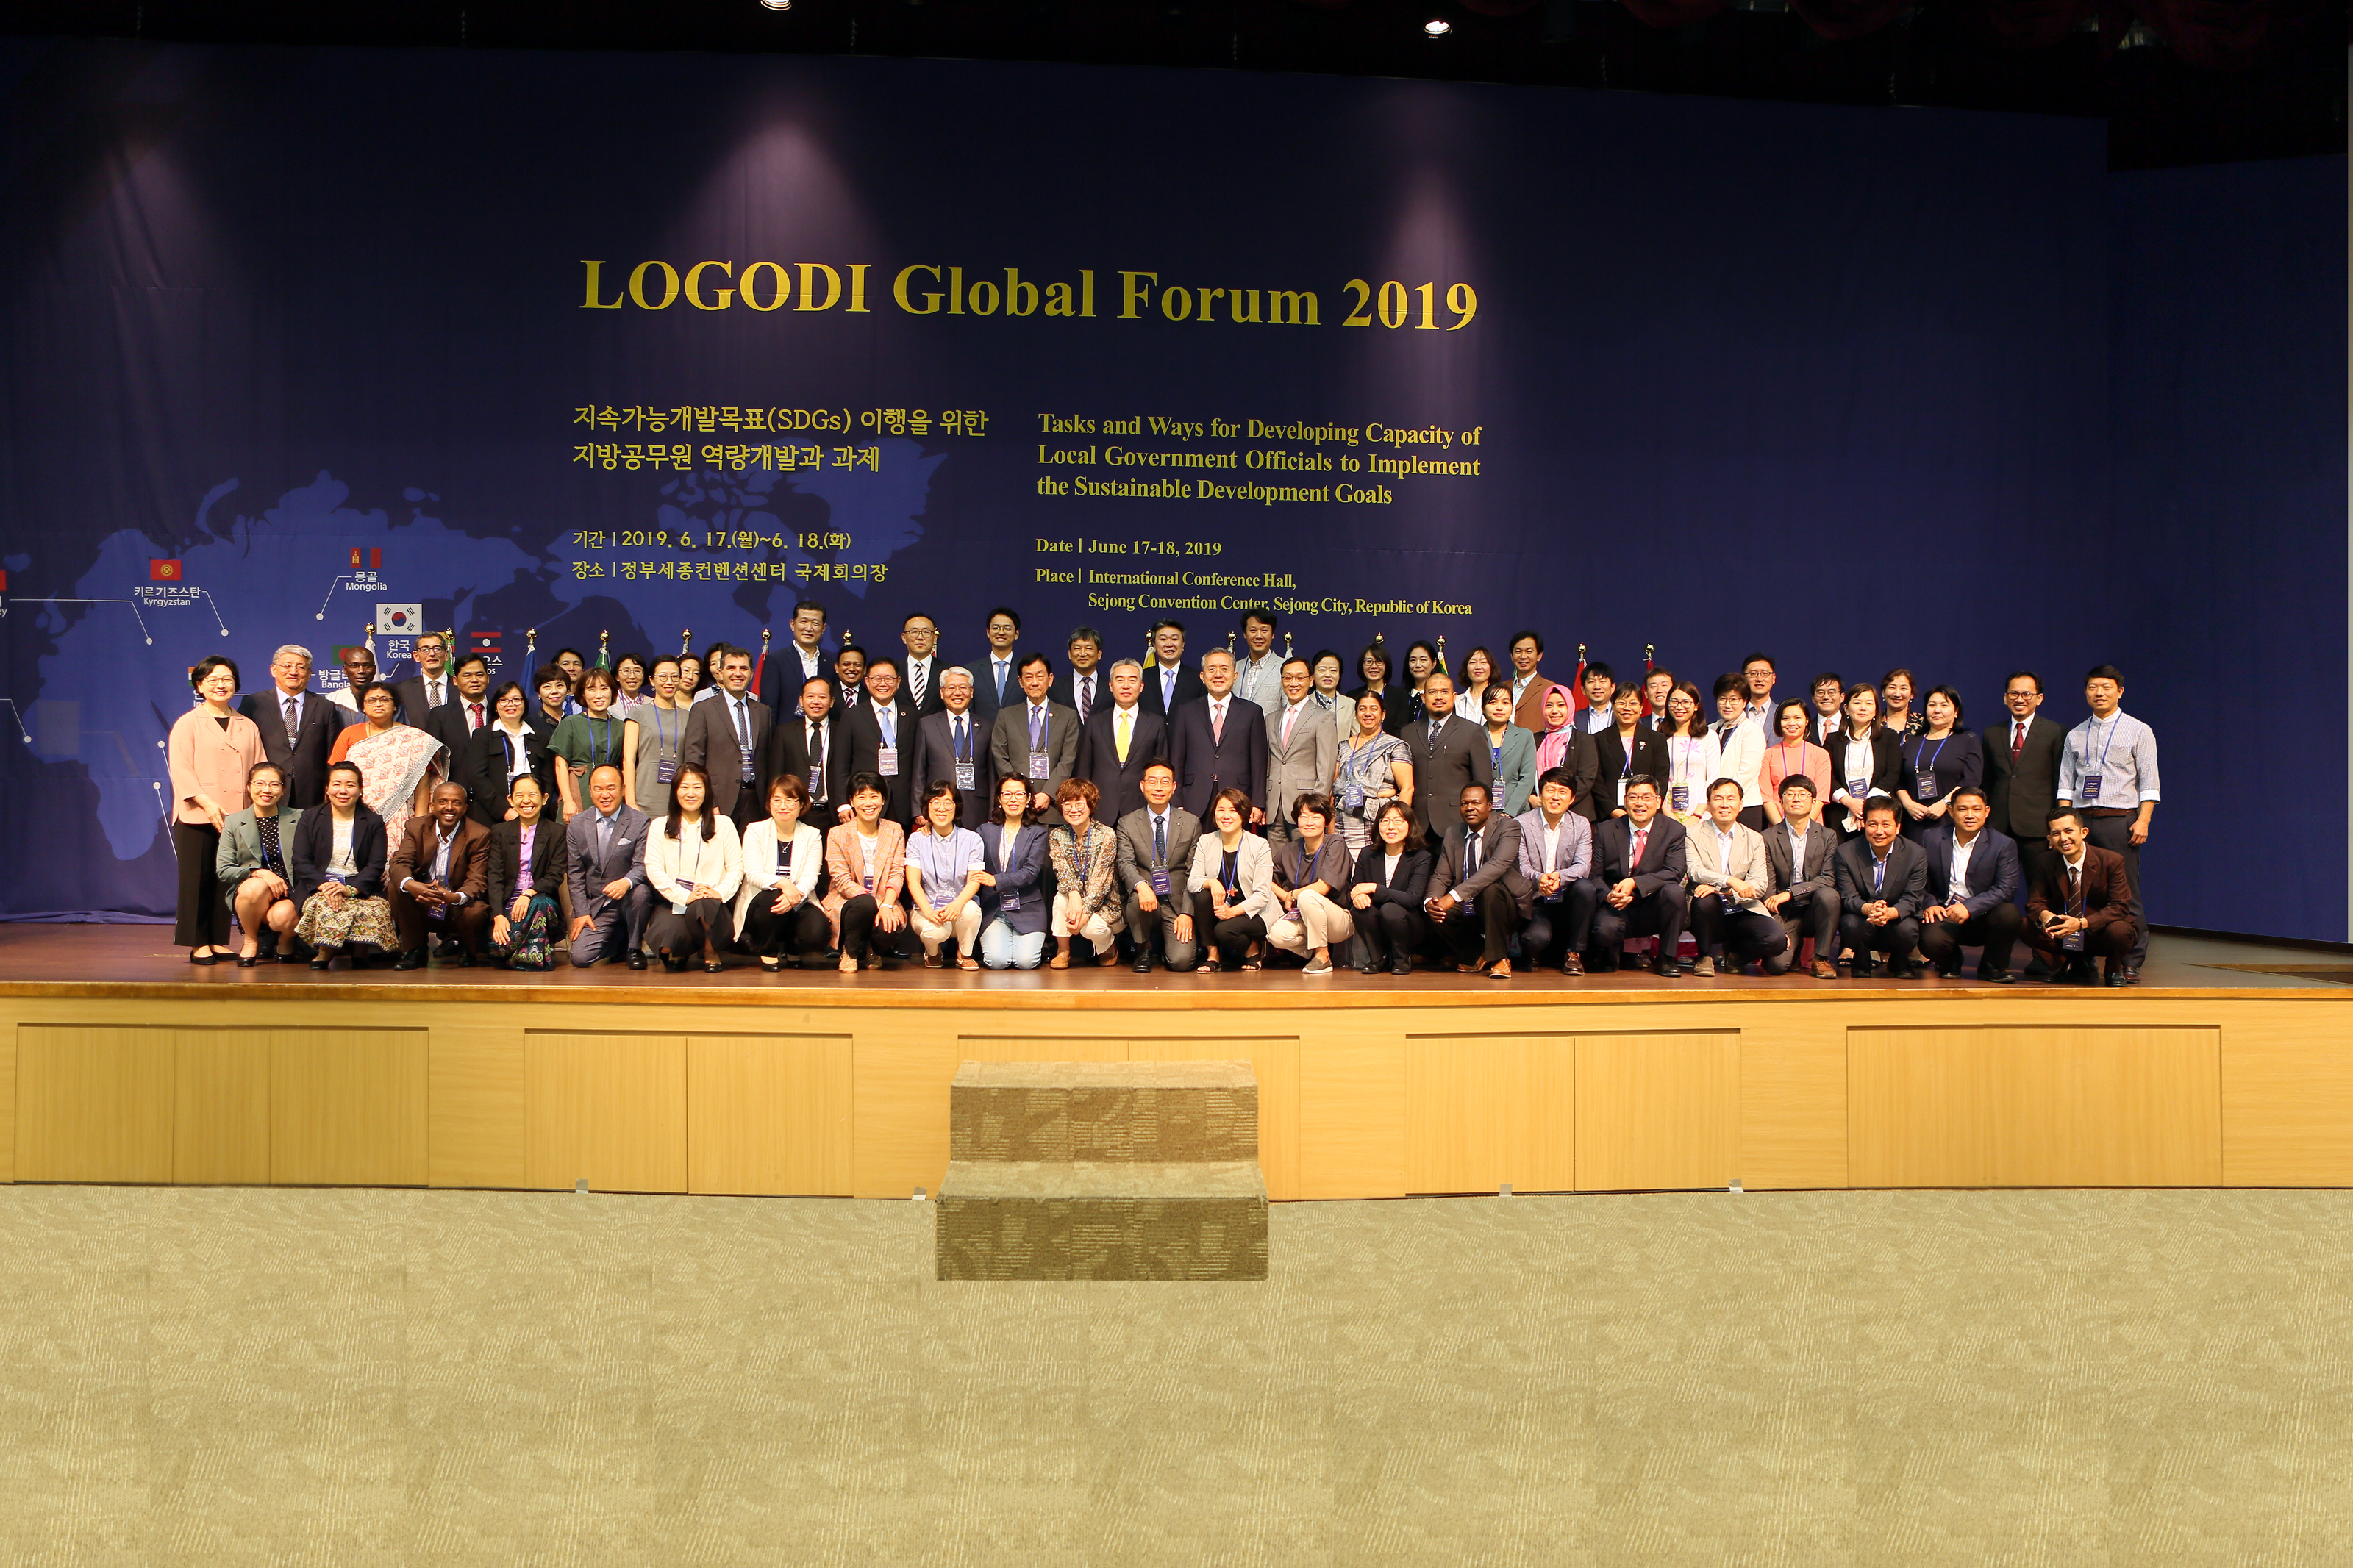 LOGODI opens the first international forum with heads of goverment officials training institutes across 12 countries. 큰 이미지[마우스 클릭 시 창닫기]